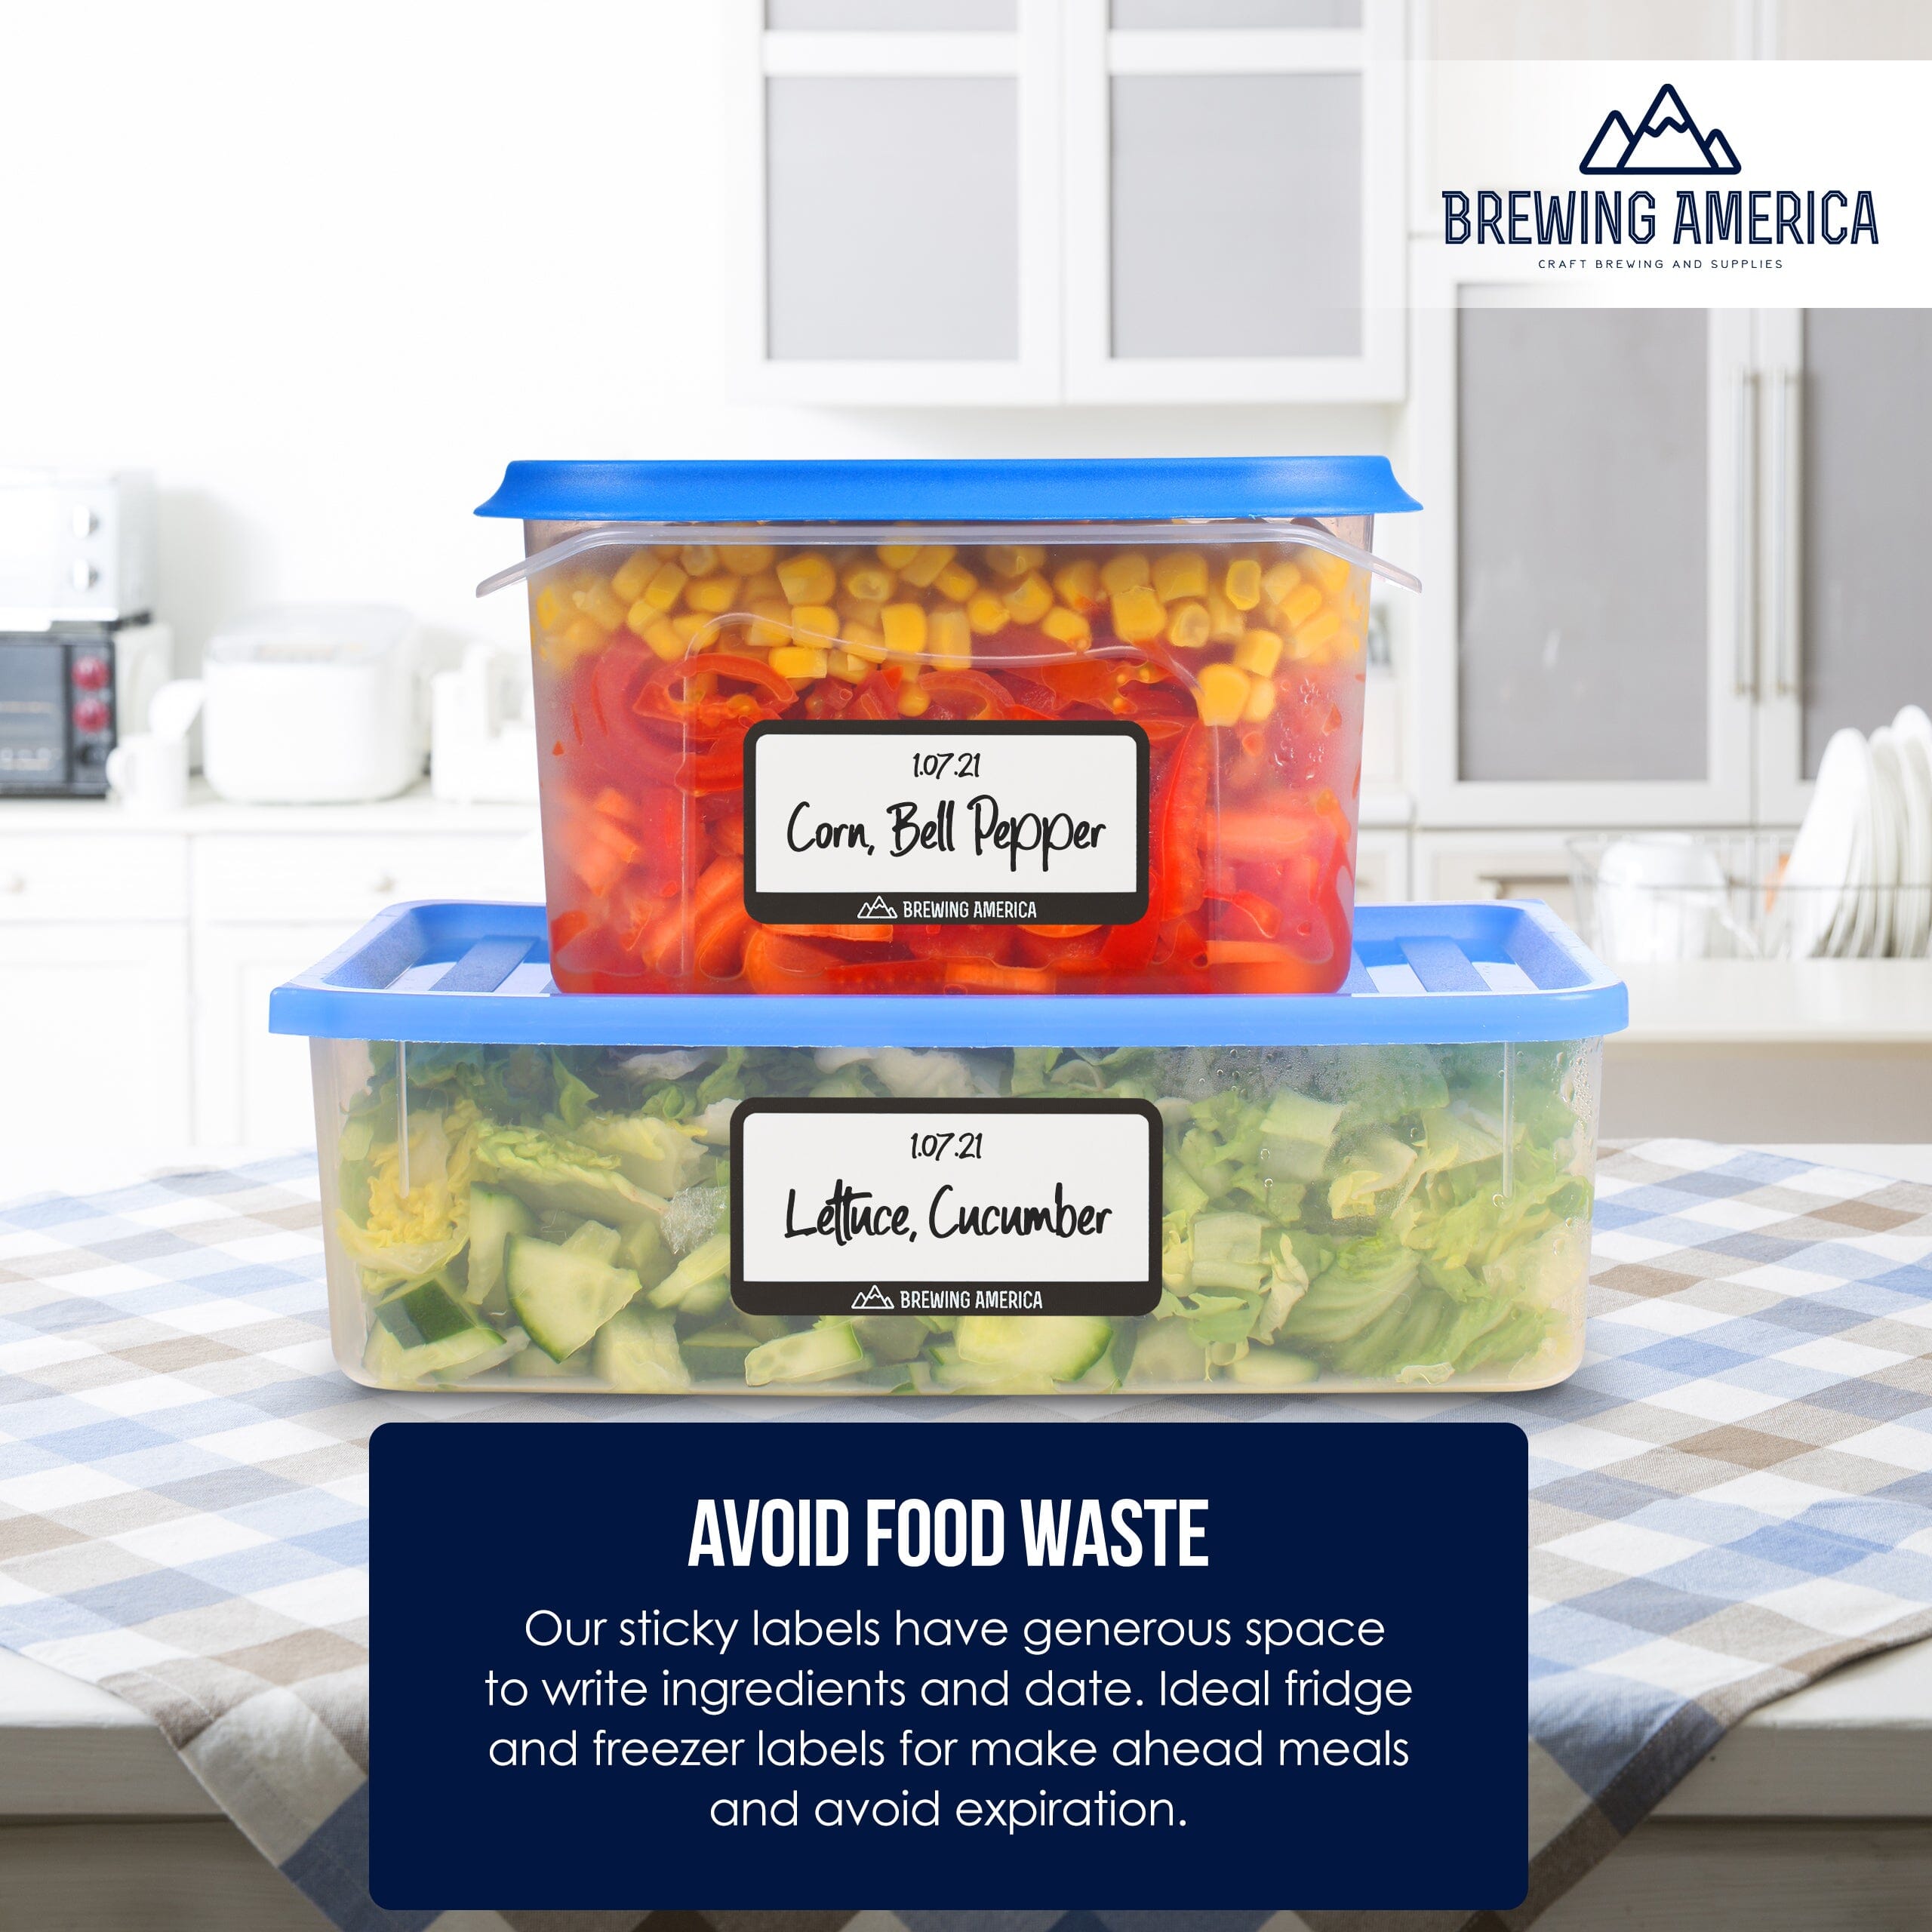 Dissolvable Food Labels for Food Containers Glass, Plastic or Metal No Scrubbing, No Residue - Black Accessories Brewing America 